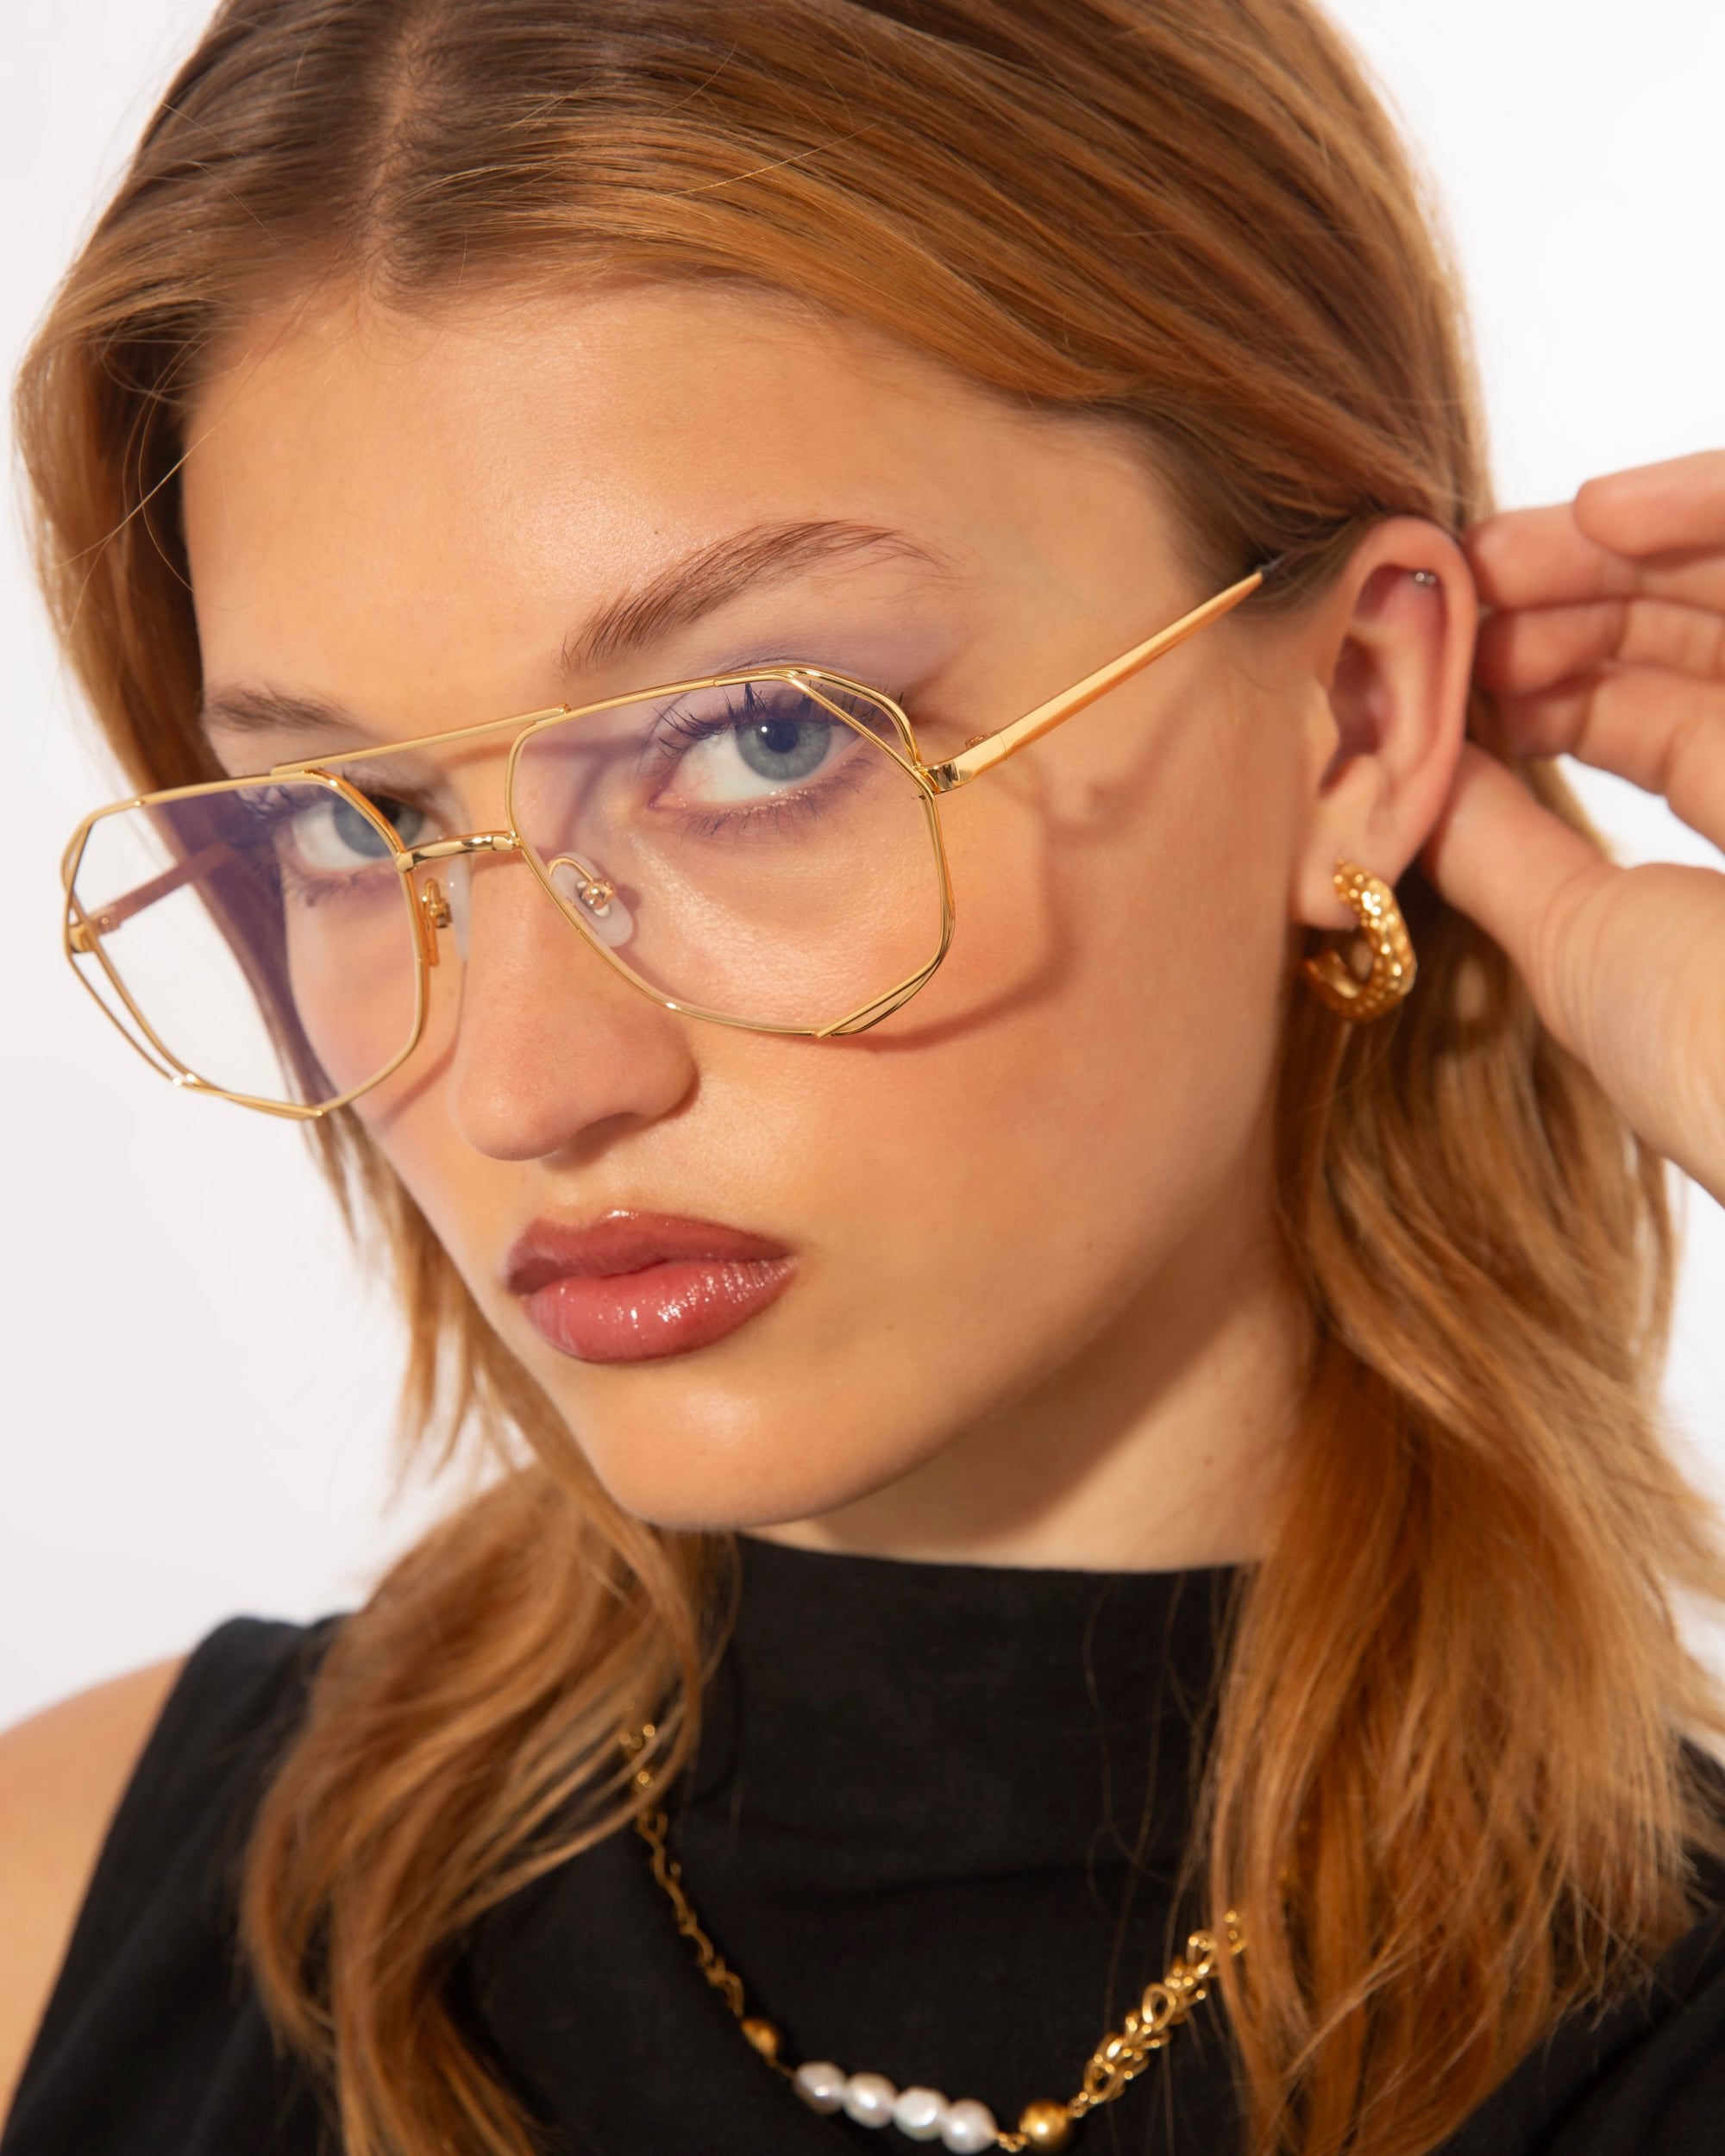 A woman with light brown hair wears oversized, gold-framed Genius Two glasses from For Art's Sake® with blue light filter lenses and gold hoop earrings. She is dressed in a black top with a necklace featuring pearls. Her hand is gently touching her ear, and she gazes directly at the camera. The background is plain white.